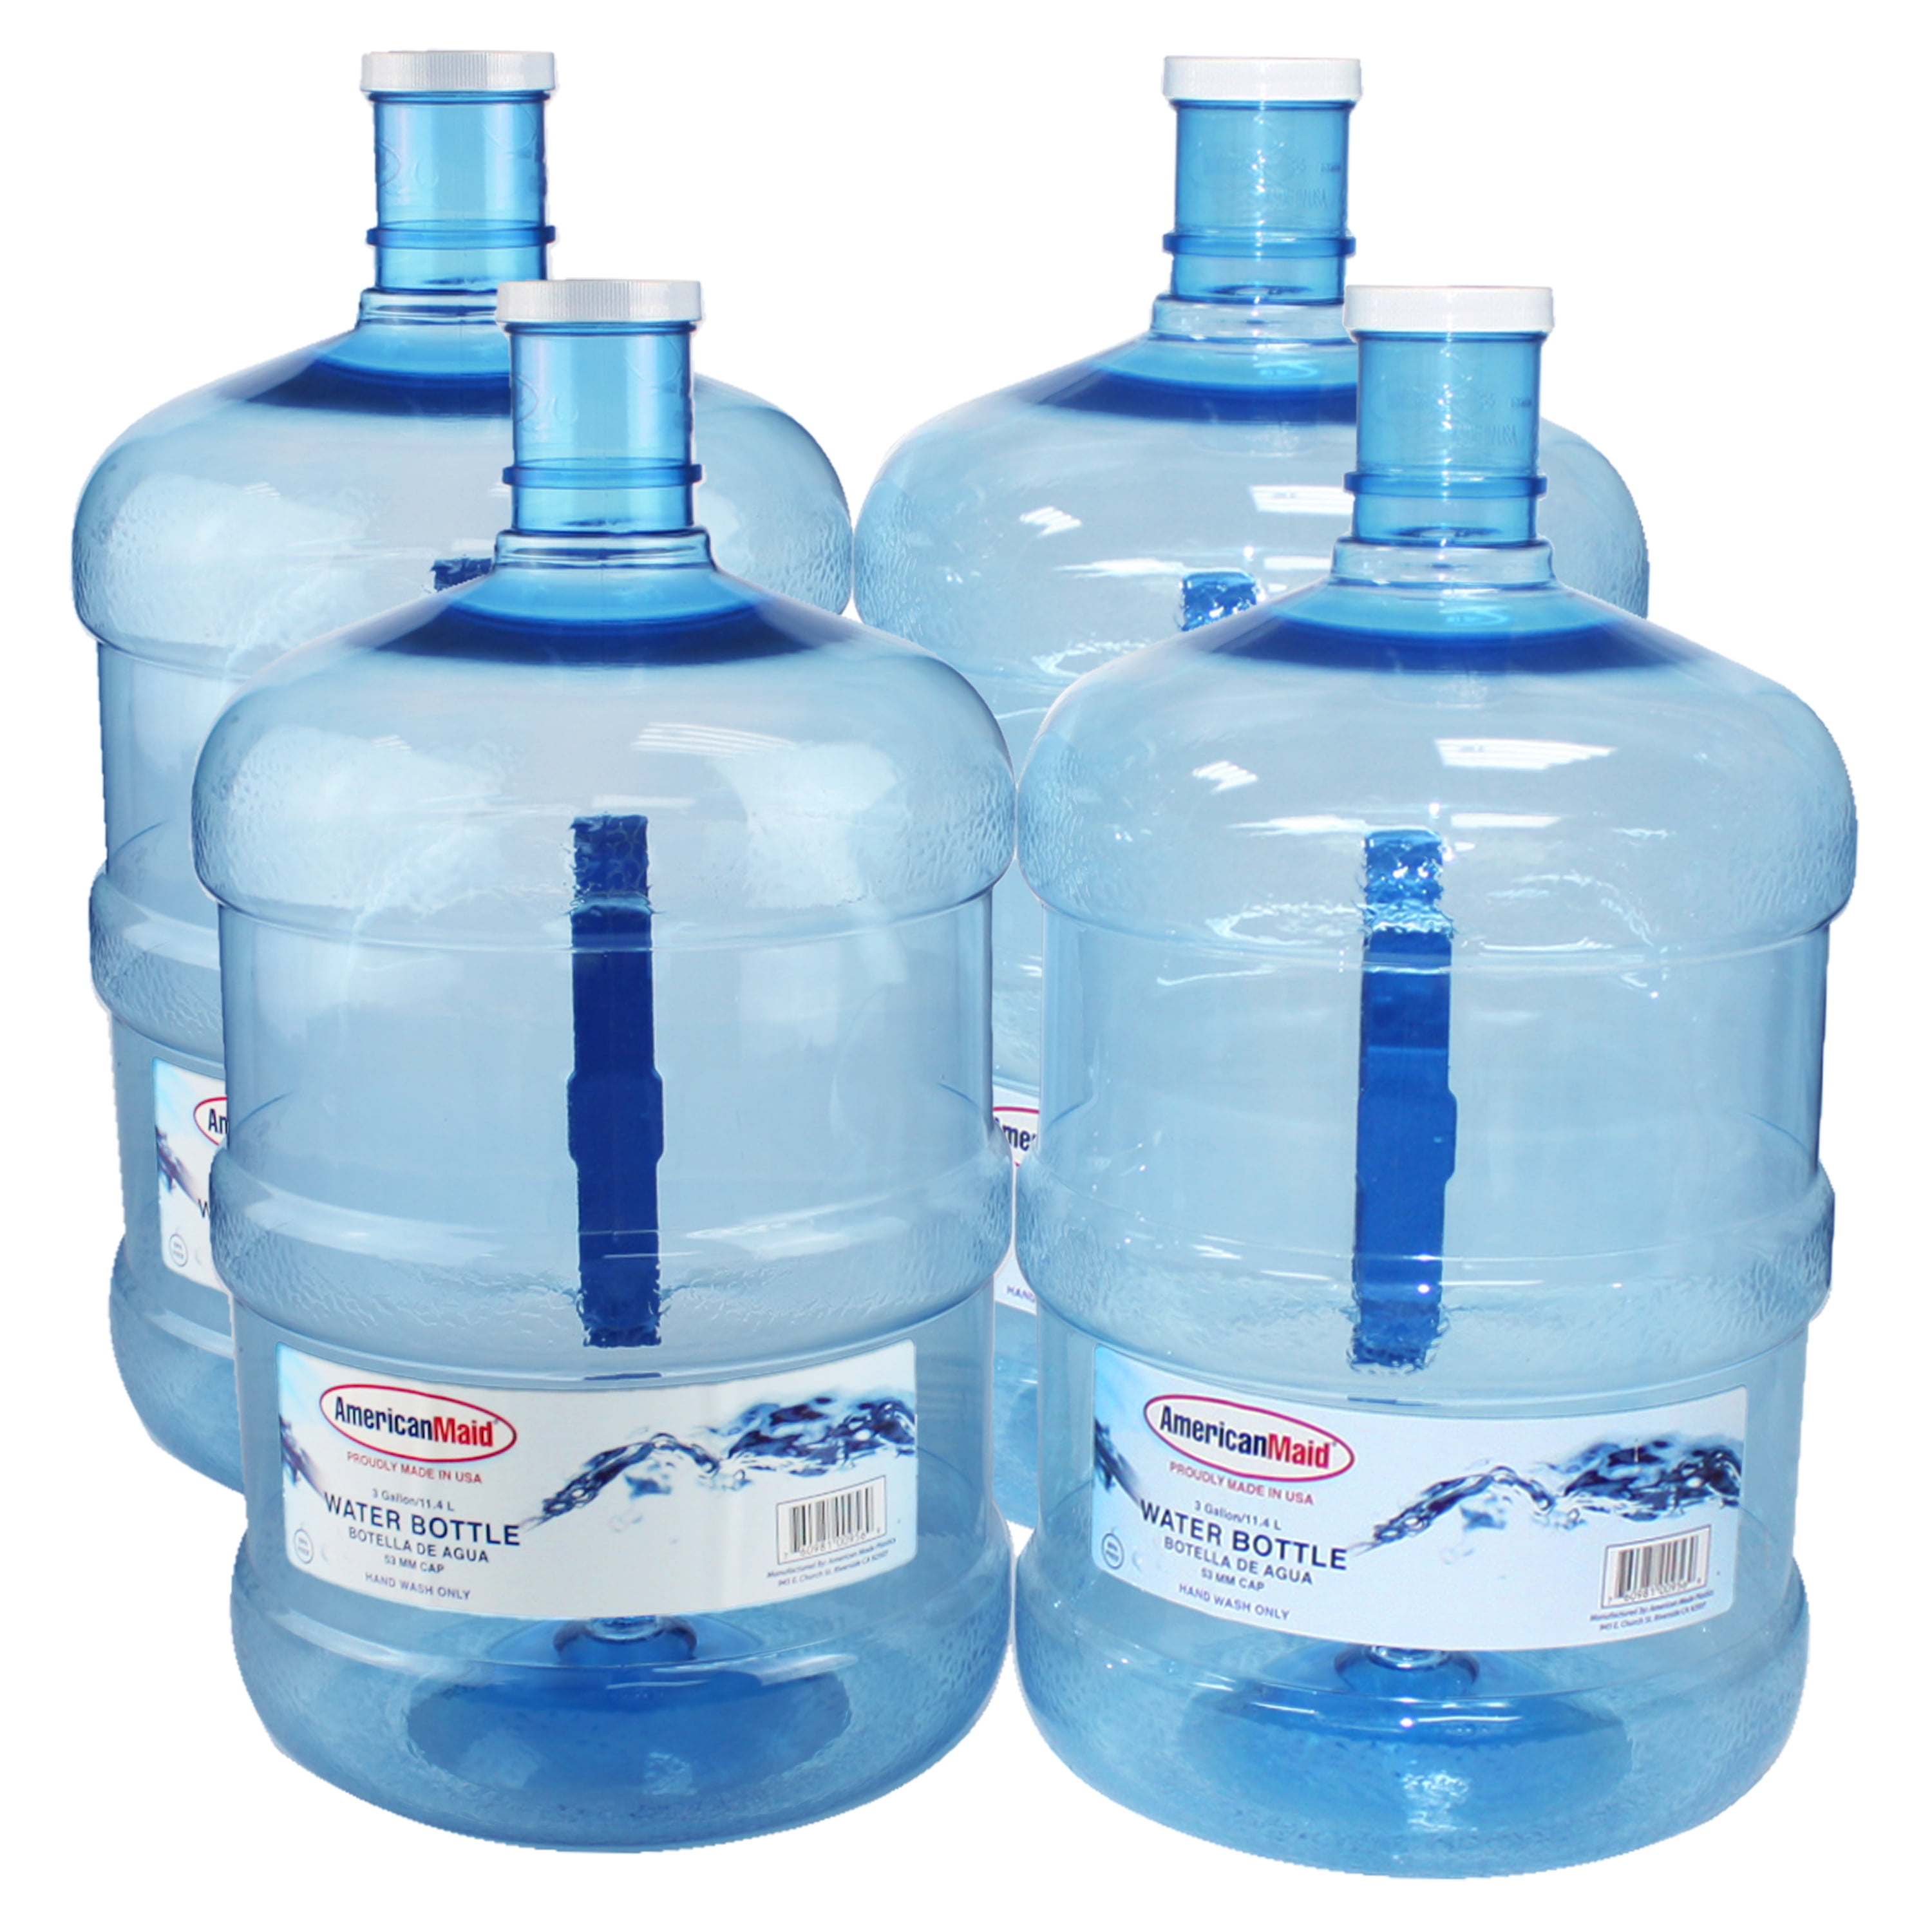 American Maid 3 Gallon Water Bottle, Pack 4 (Water Not Included) 